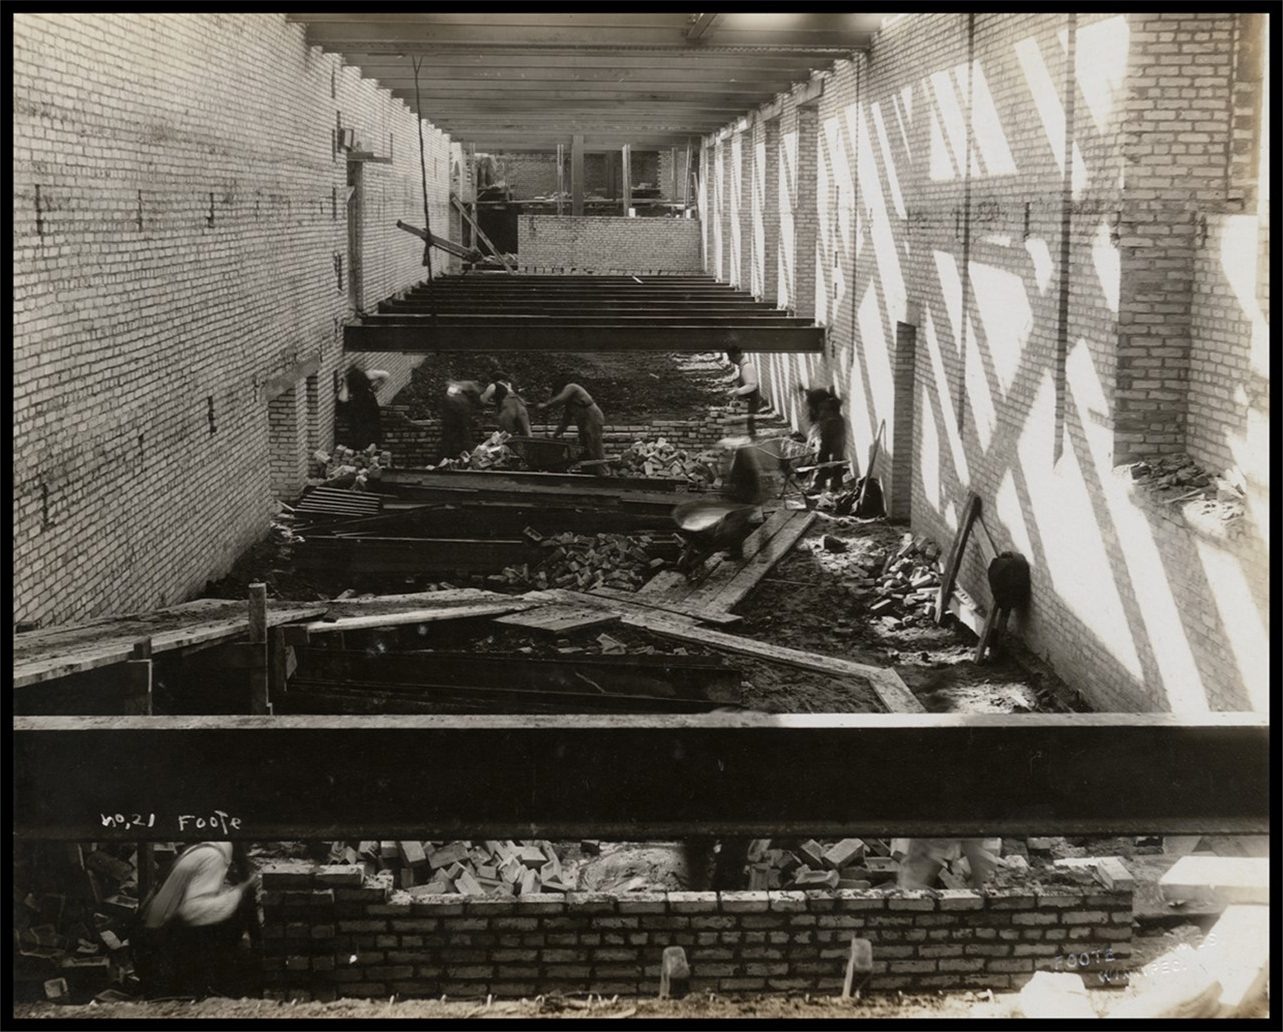 Photo of an interior portion of the building. The area is cluttered with construction materials. Large steel beams are suspended parallel to the floor, while workers build brick walls and push wheel barrows along temporary wood boardwalks.